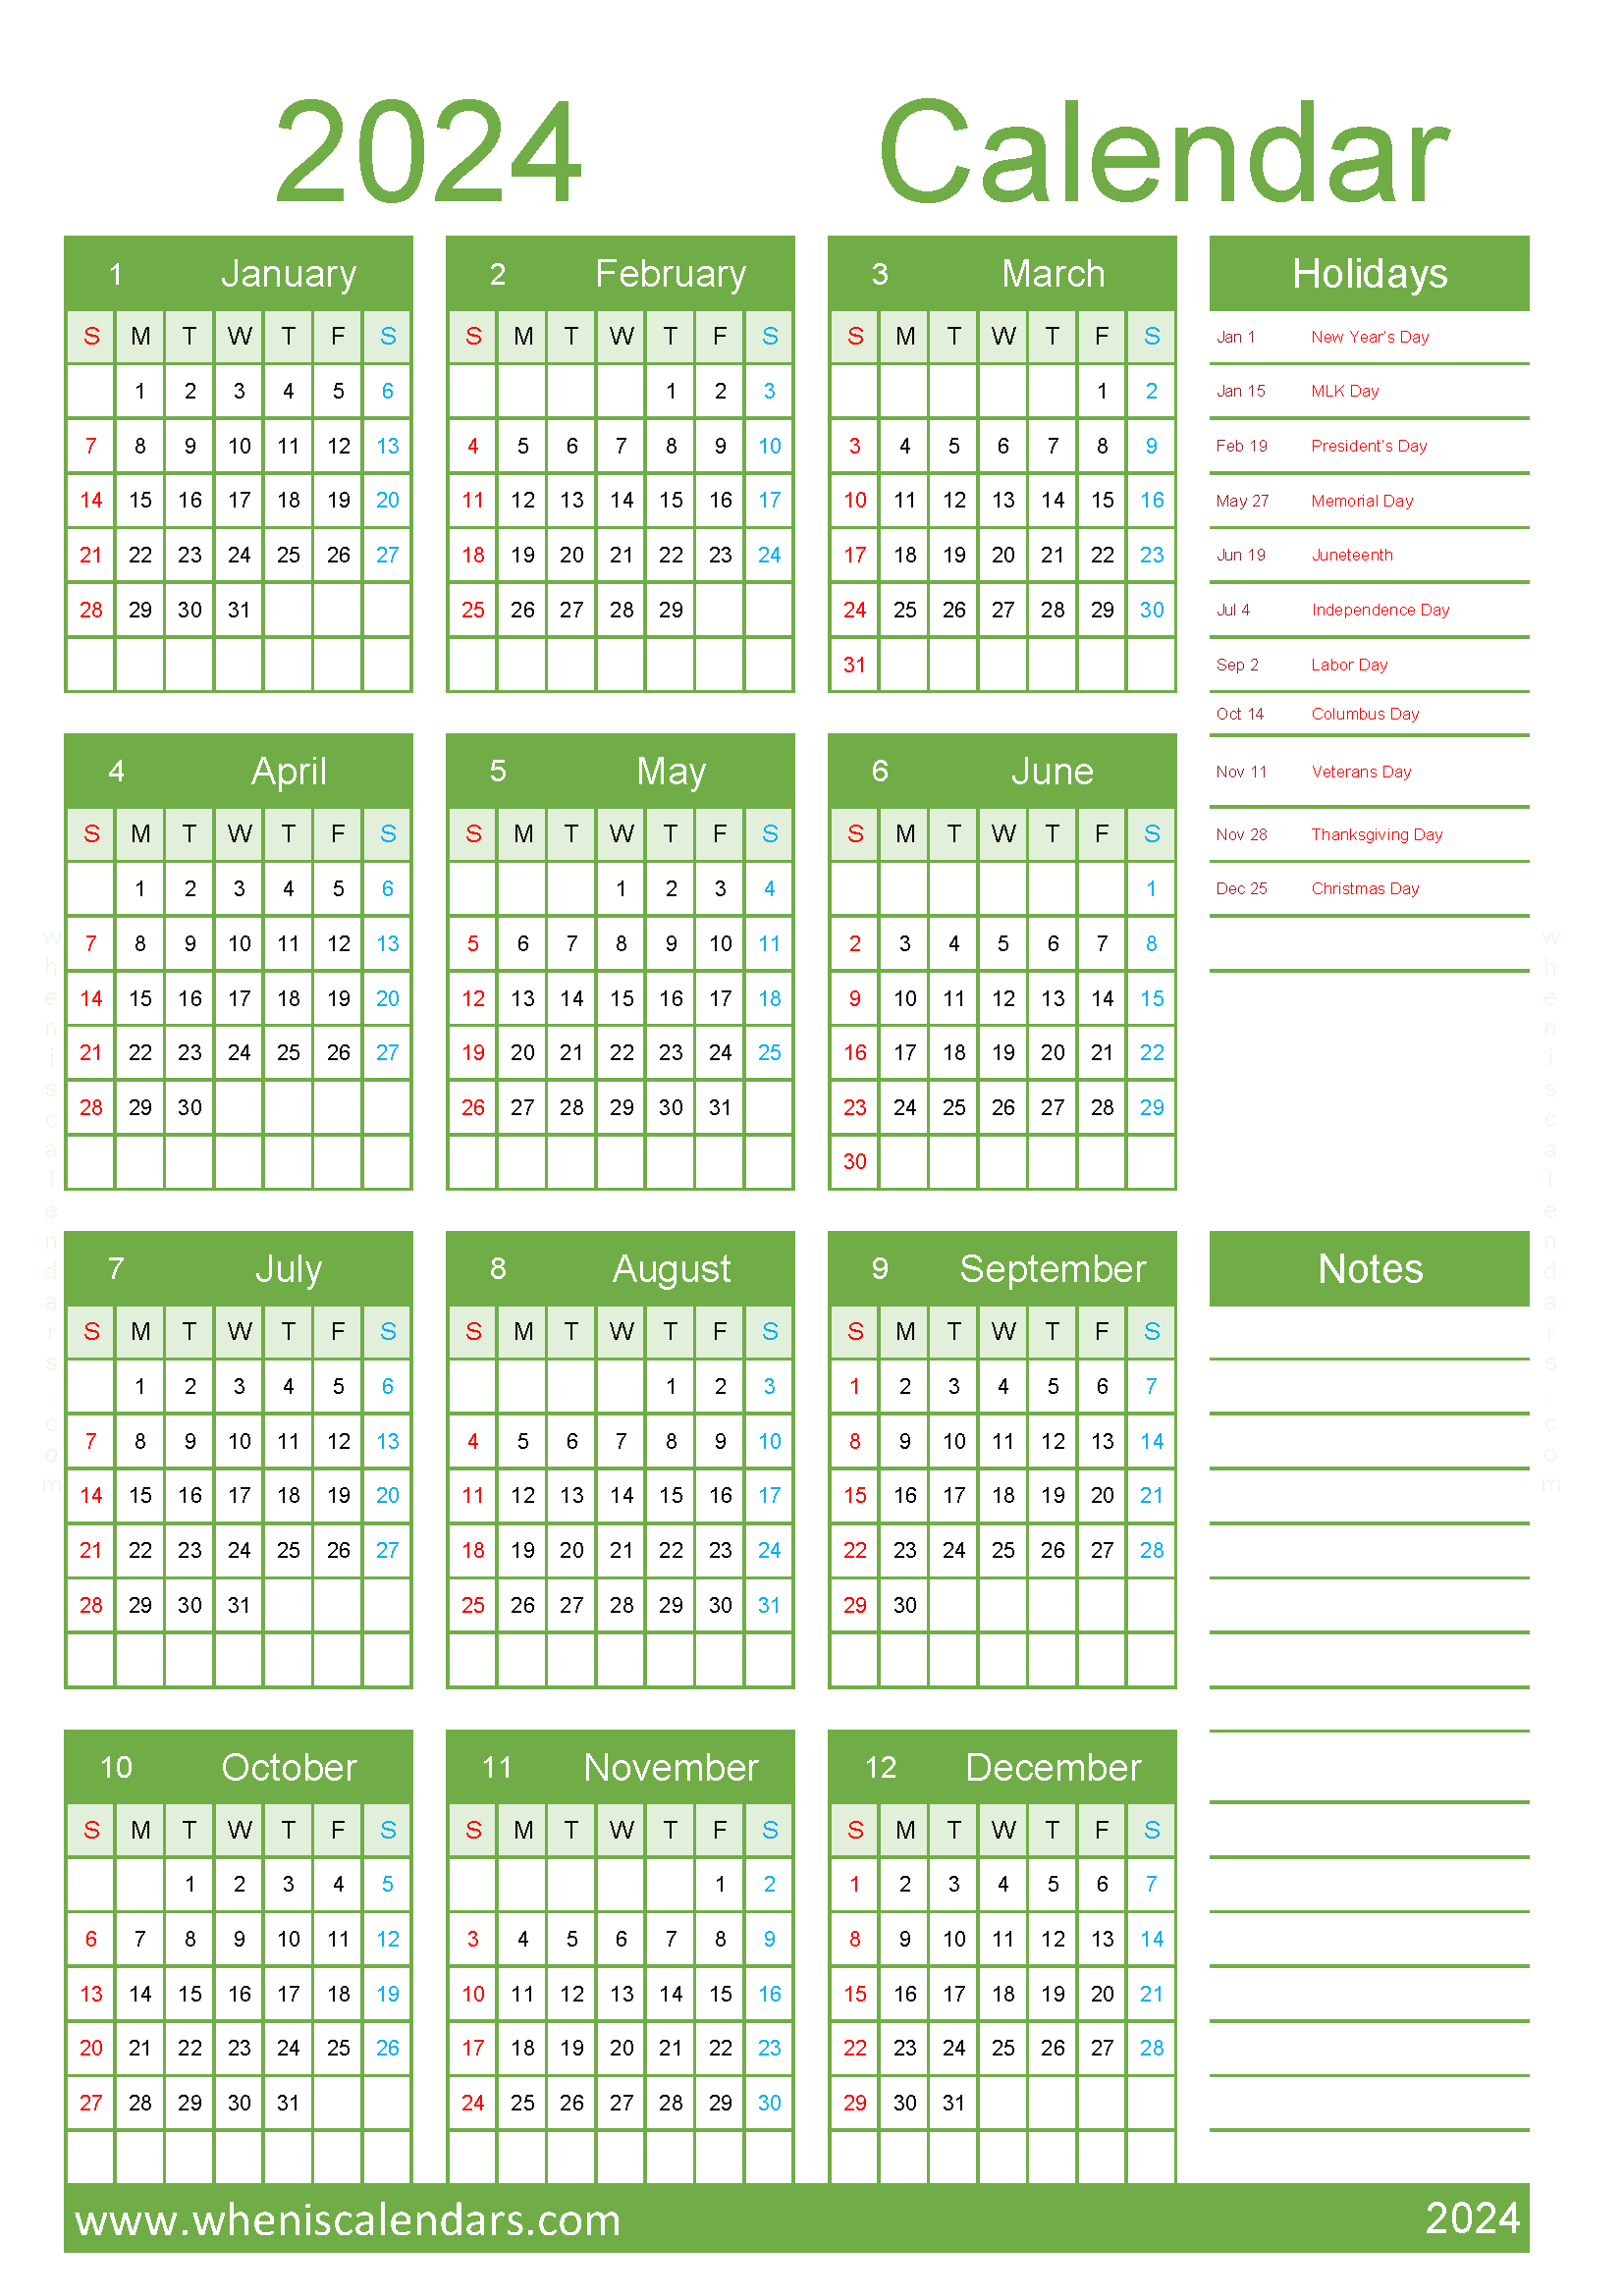 2024 Calendar with Holidays printable free A4 in vertical portrait